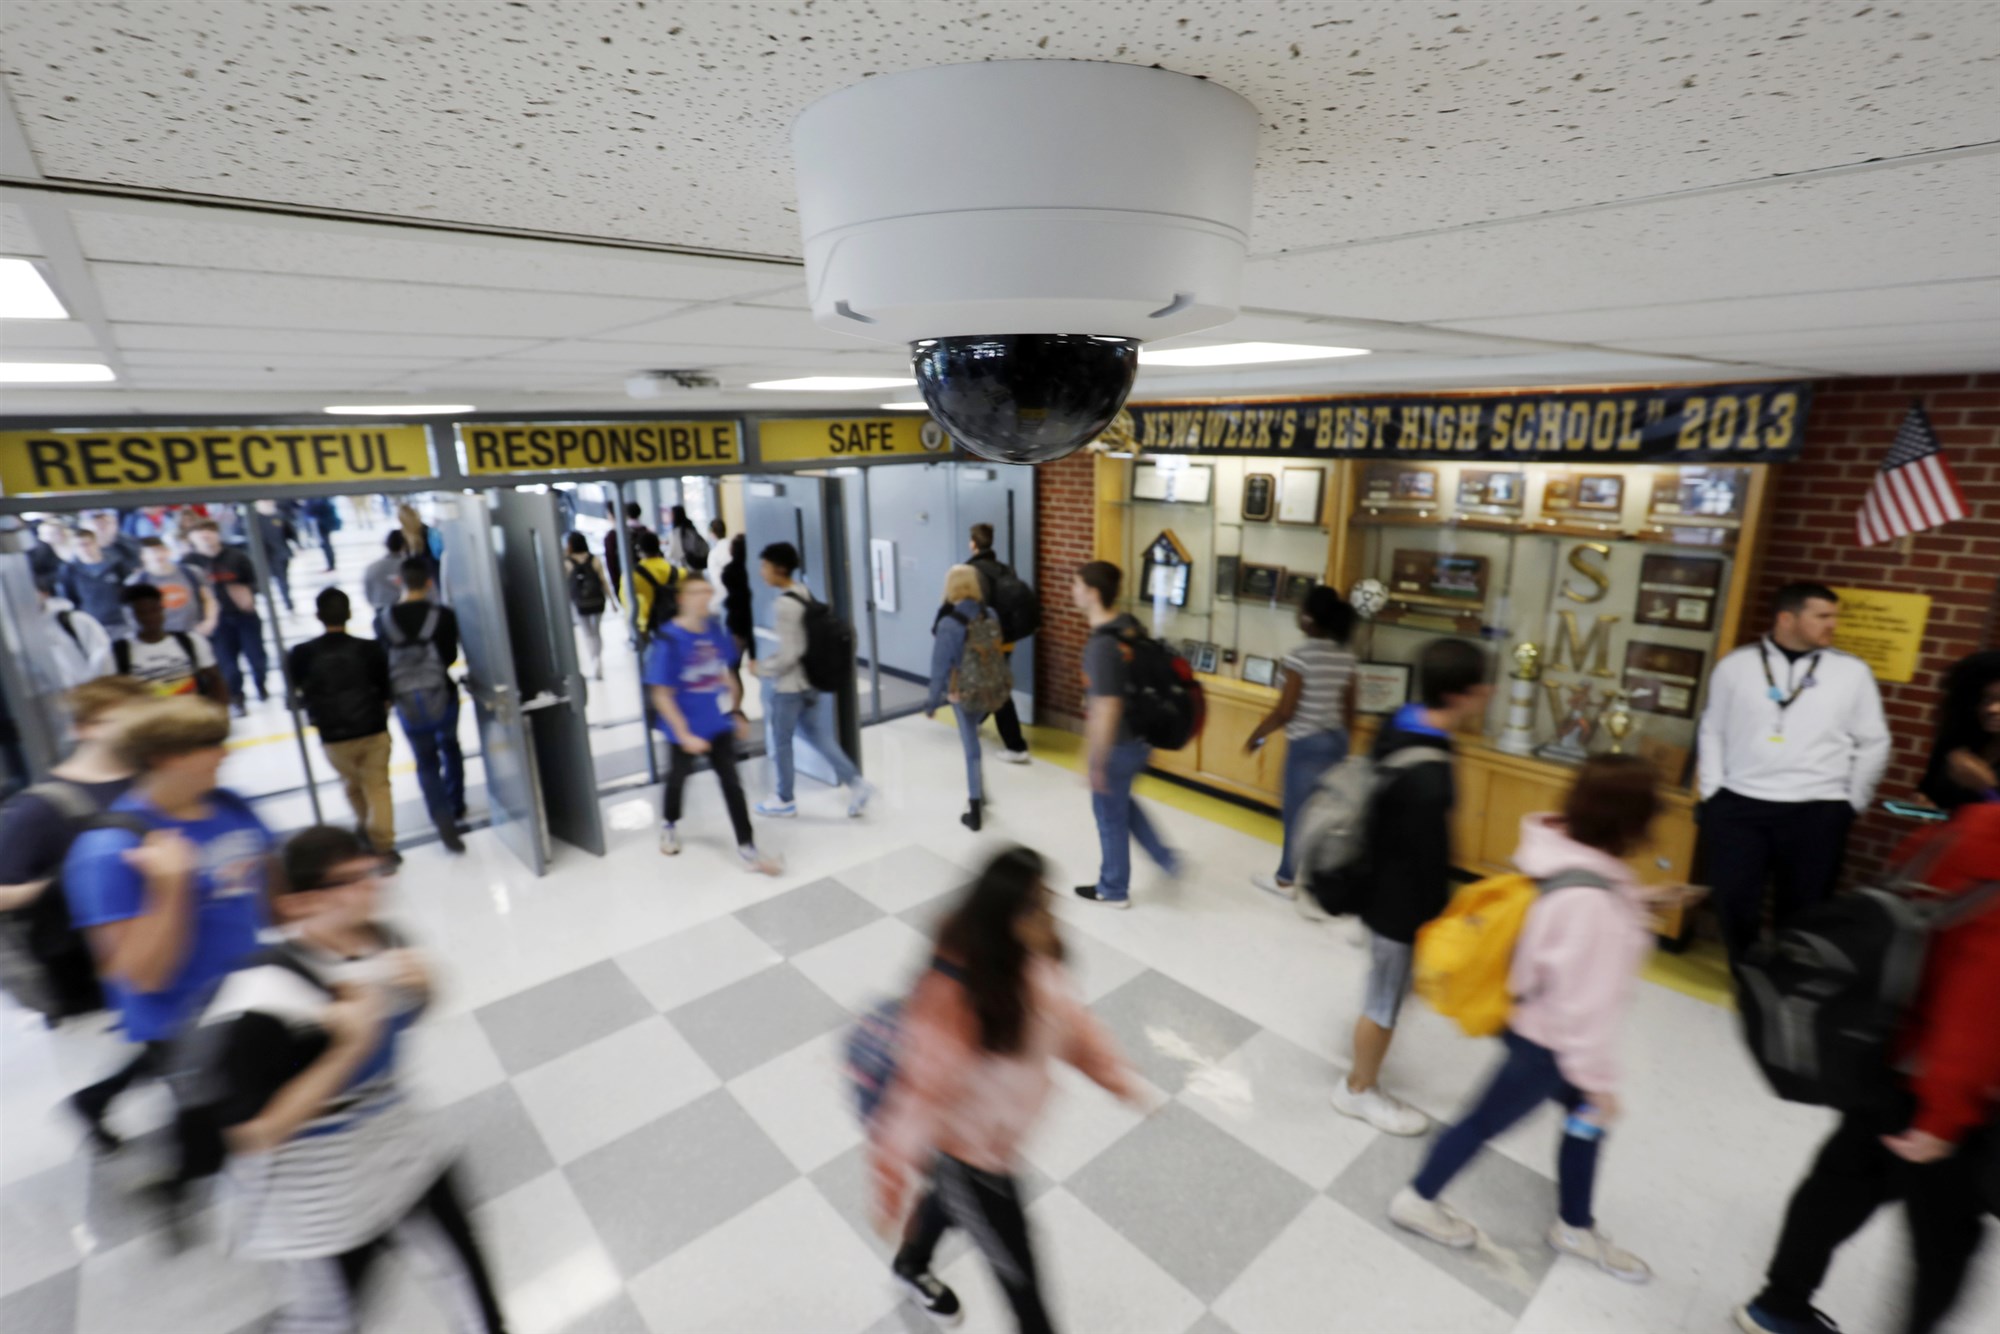 Schools Are Spending Billions on High-Tech Security. But Are Students Safer?